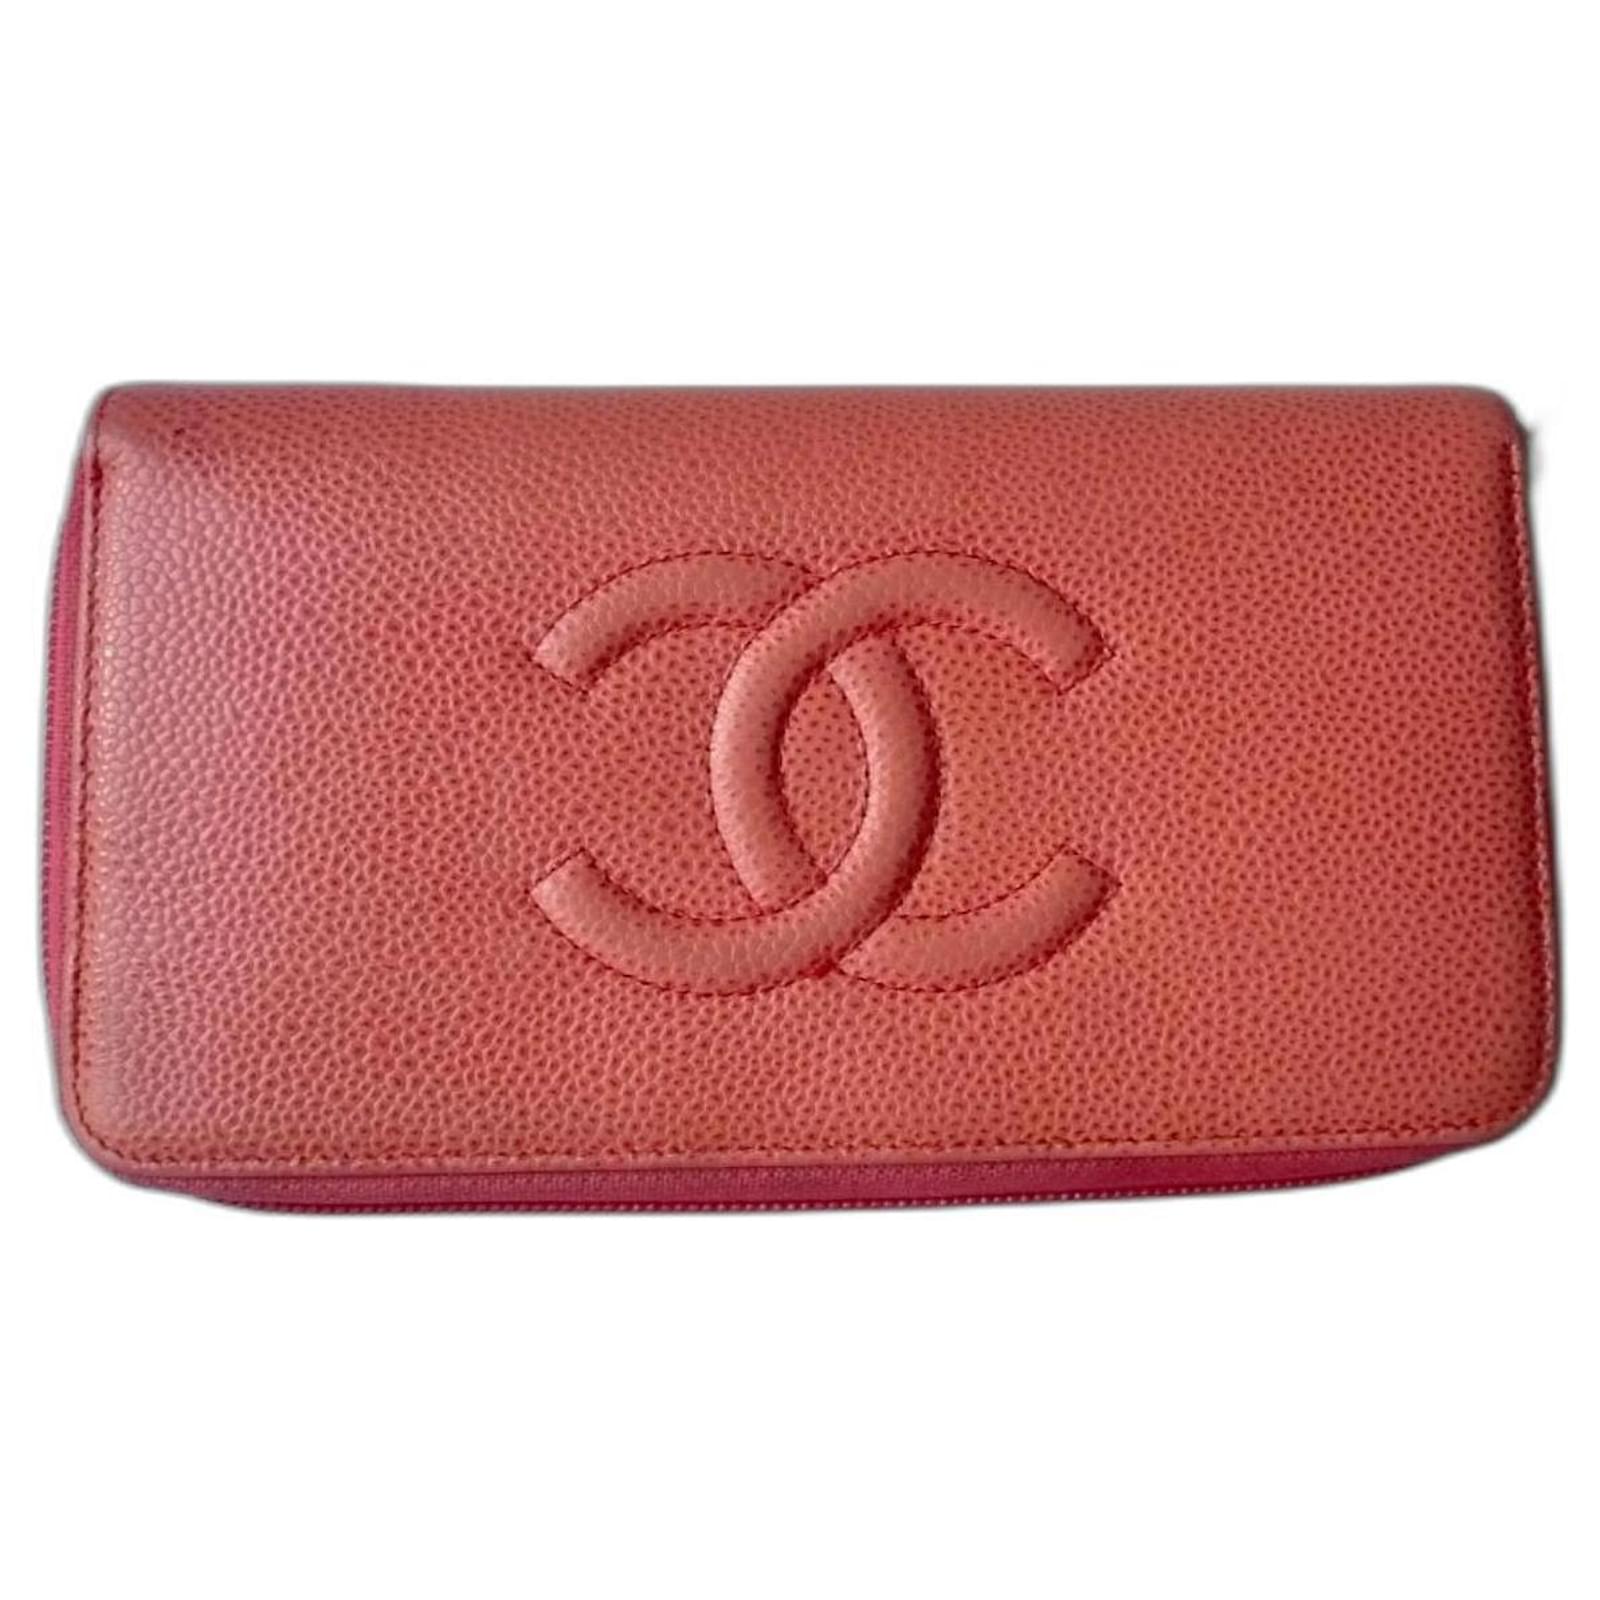 chanel red long wallet leather